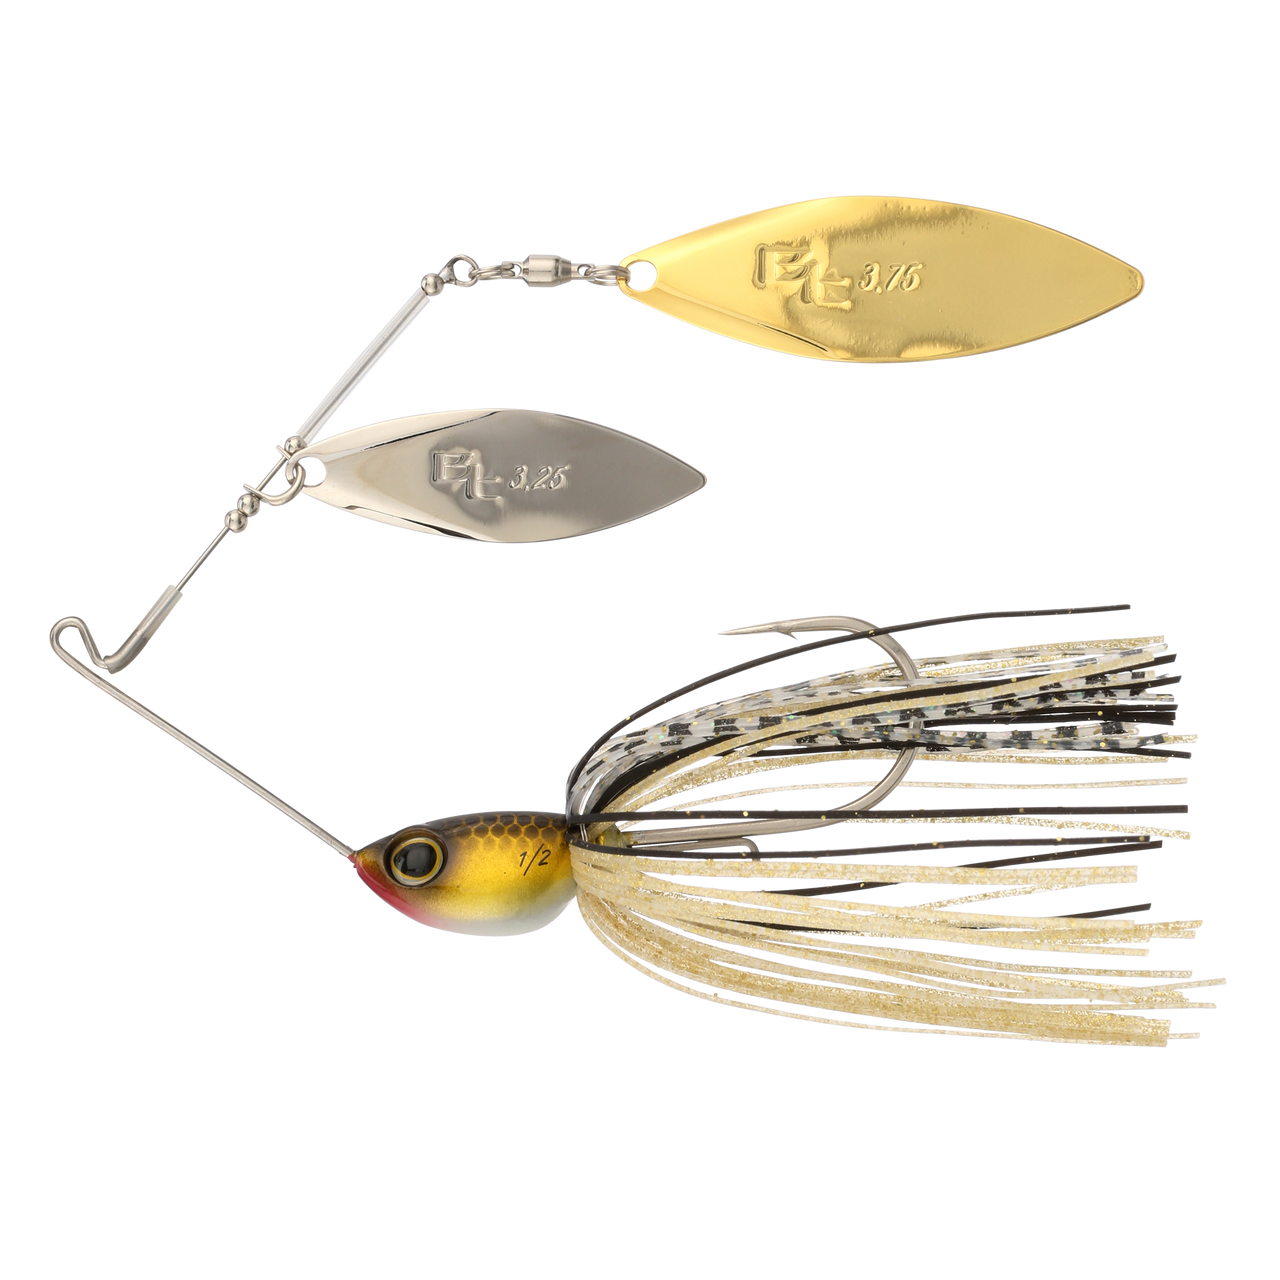 Shimano Swagy DW Double Willow Spinnerbait - 1/2oz - Natural Bait